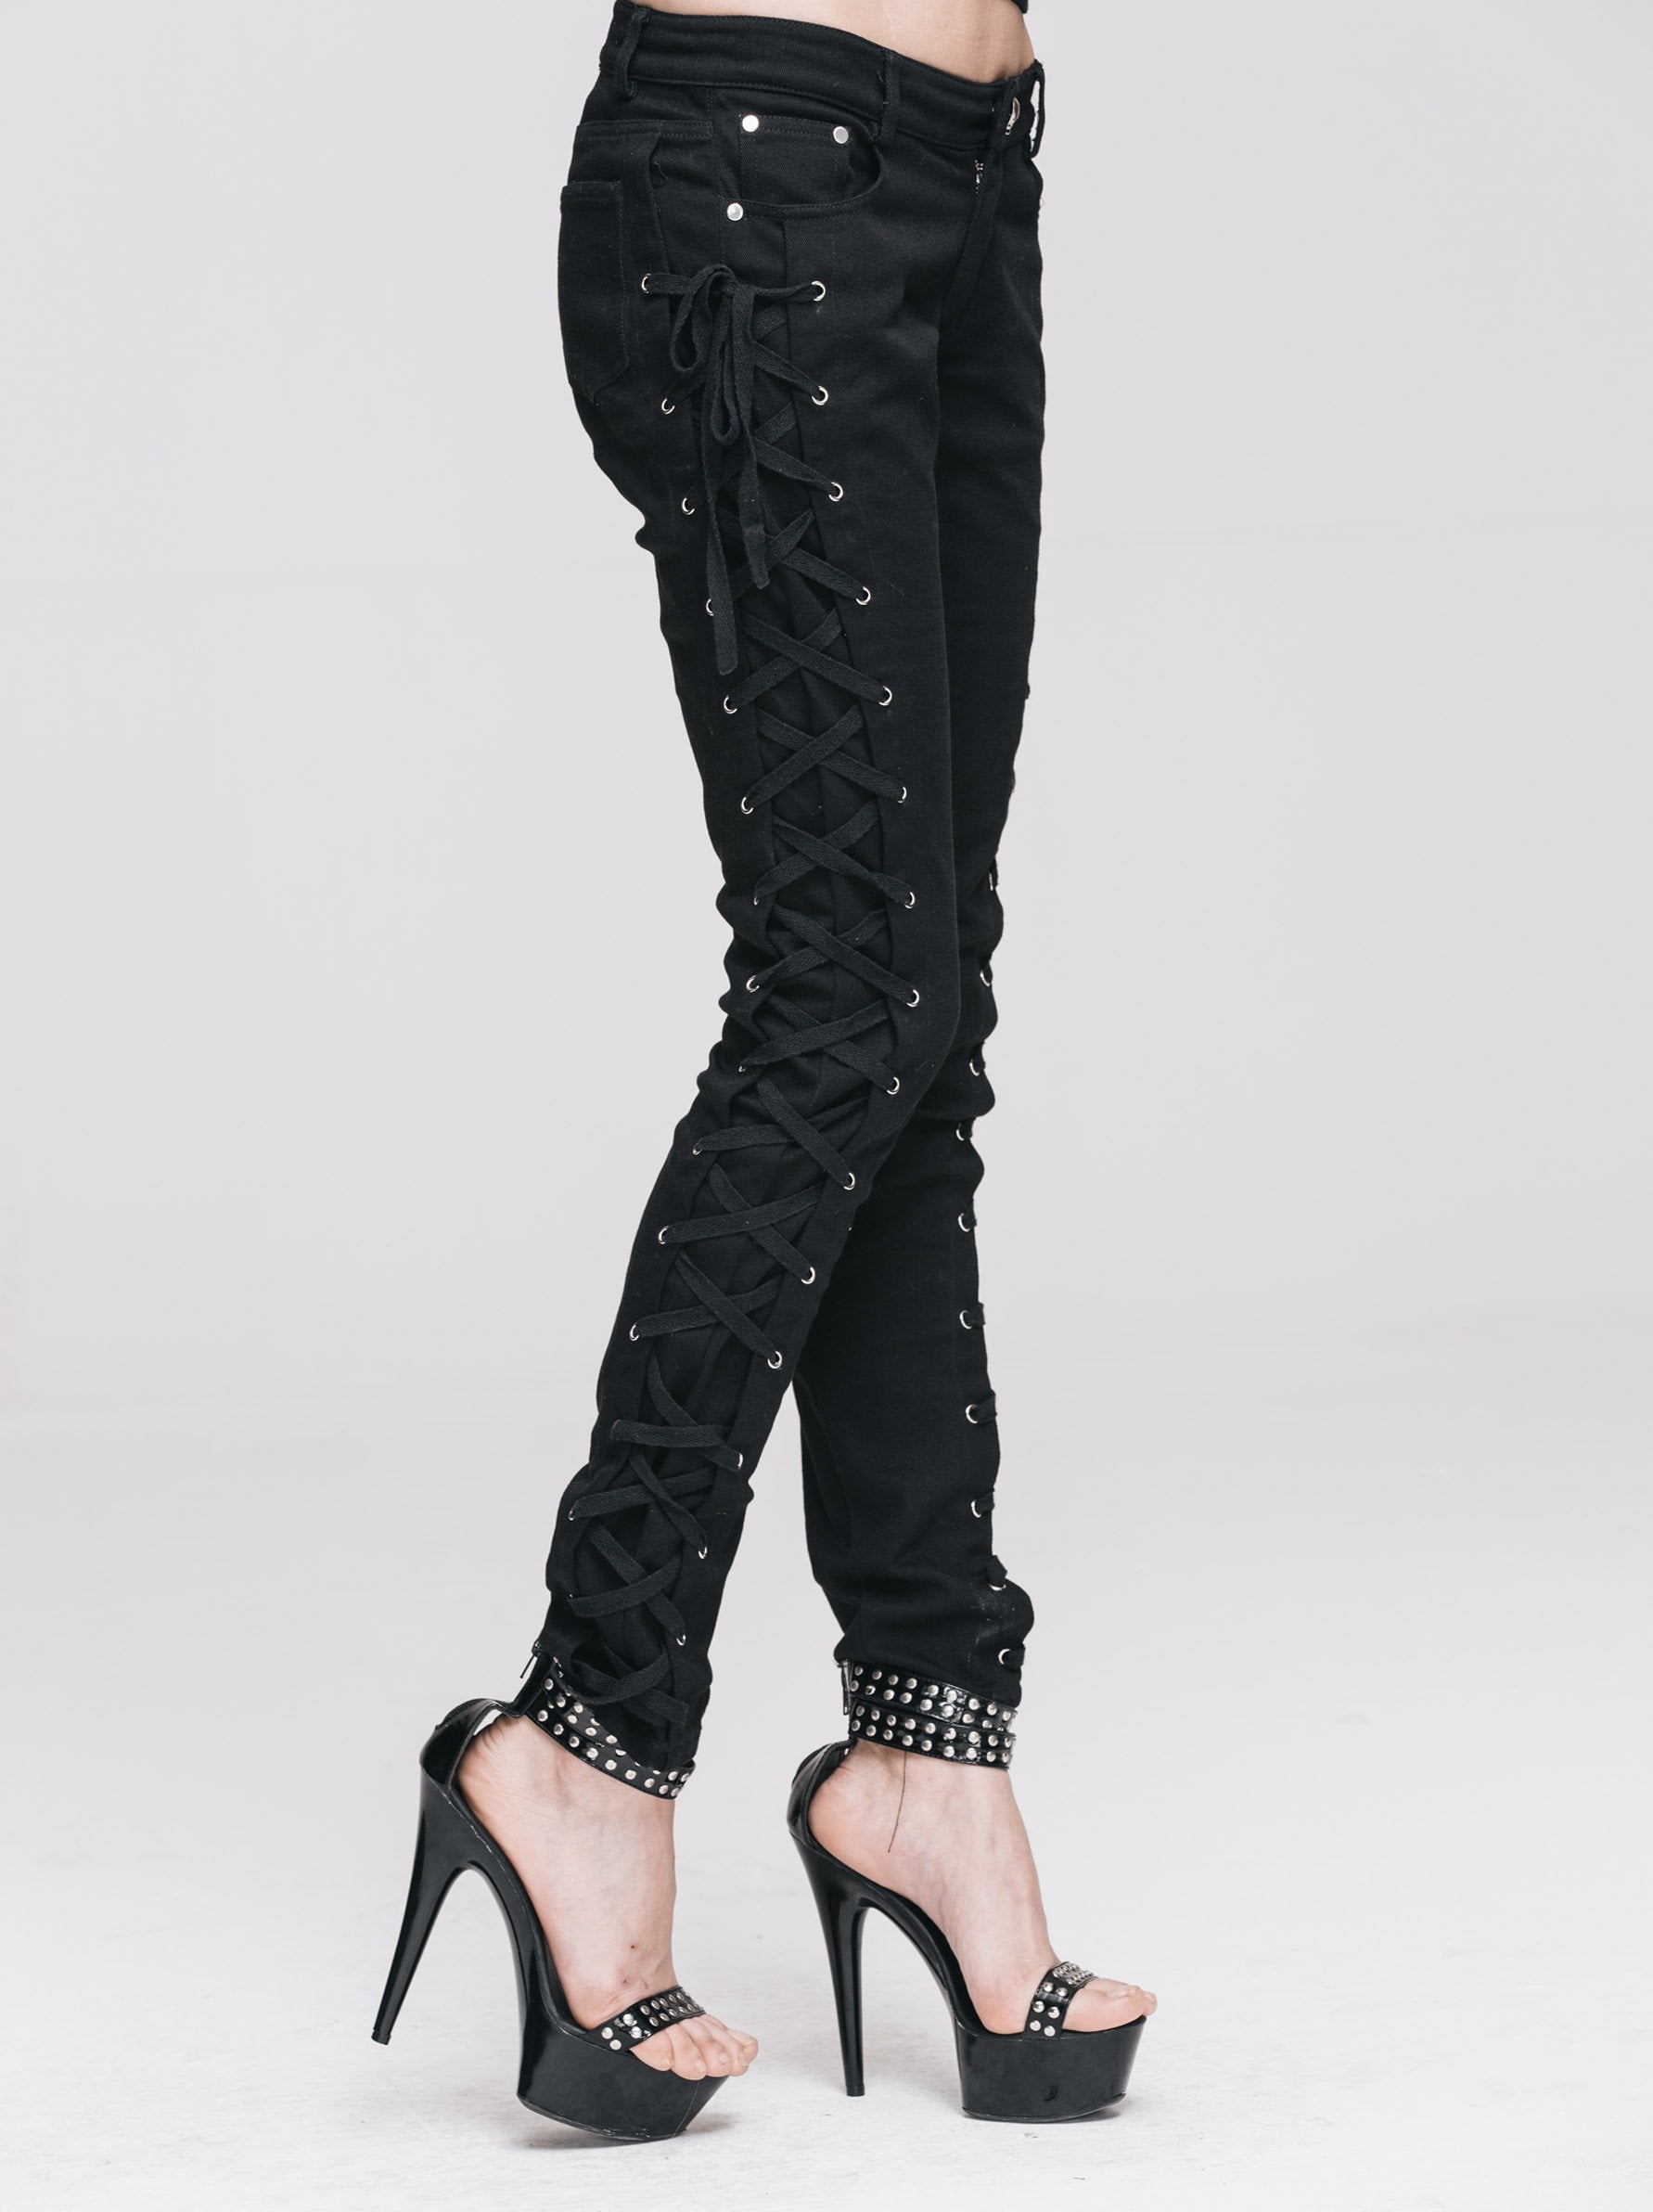 Daily Life Punk Style Lace Up Stretchy Black Women Pants